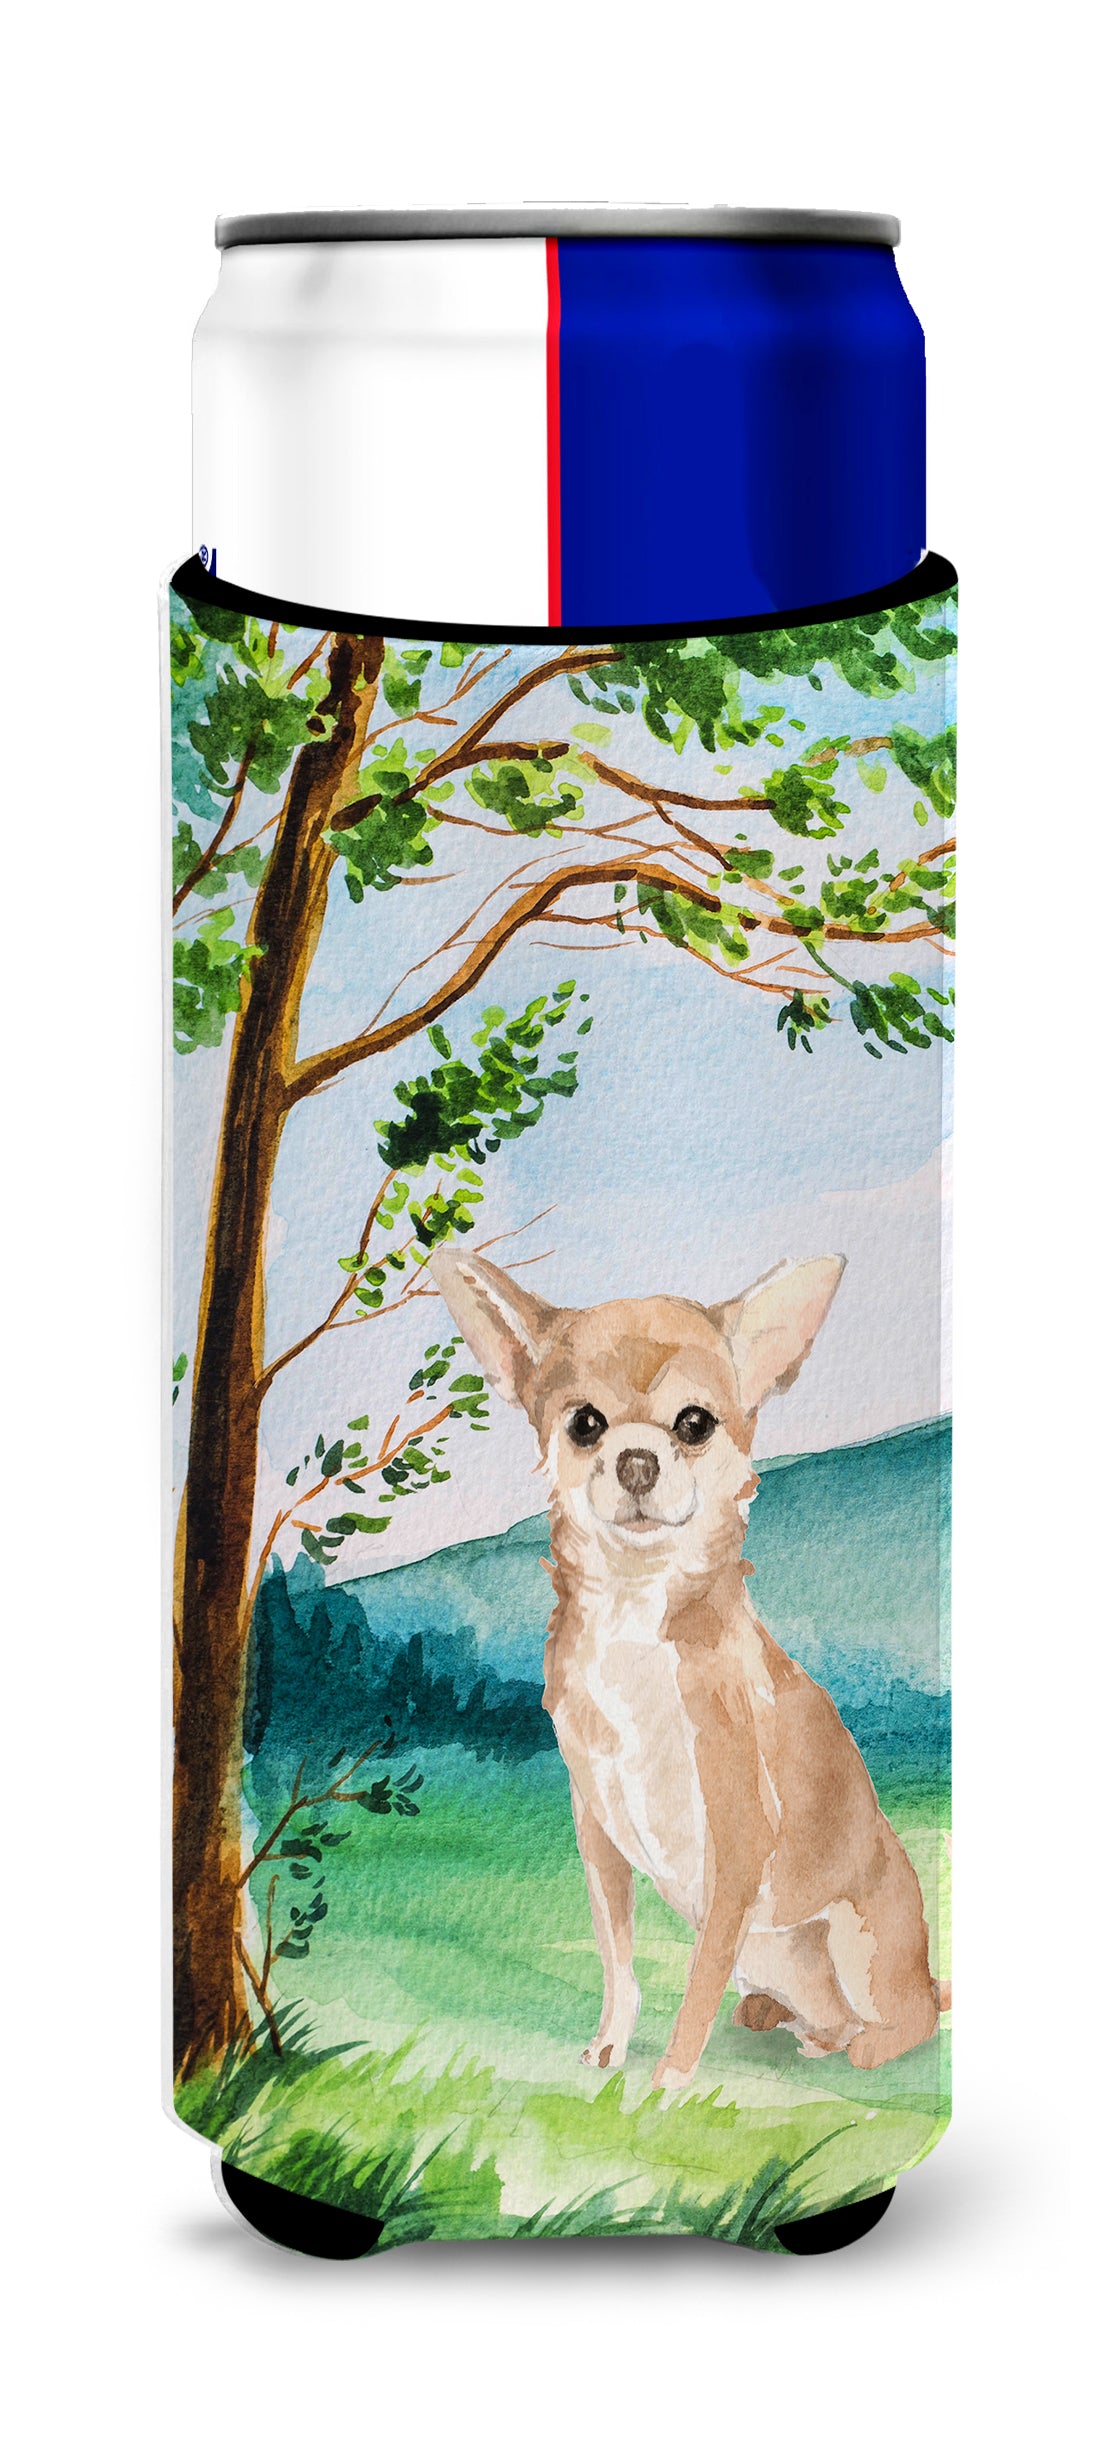 Under the Tree Chihuahua  Ultra Hugger for slim cans CK2018MUK